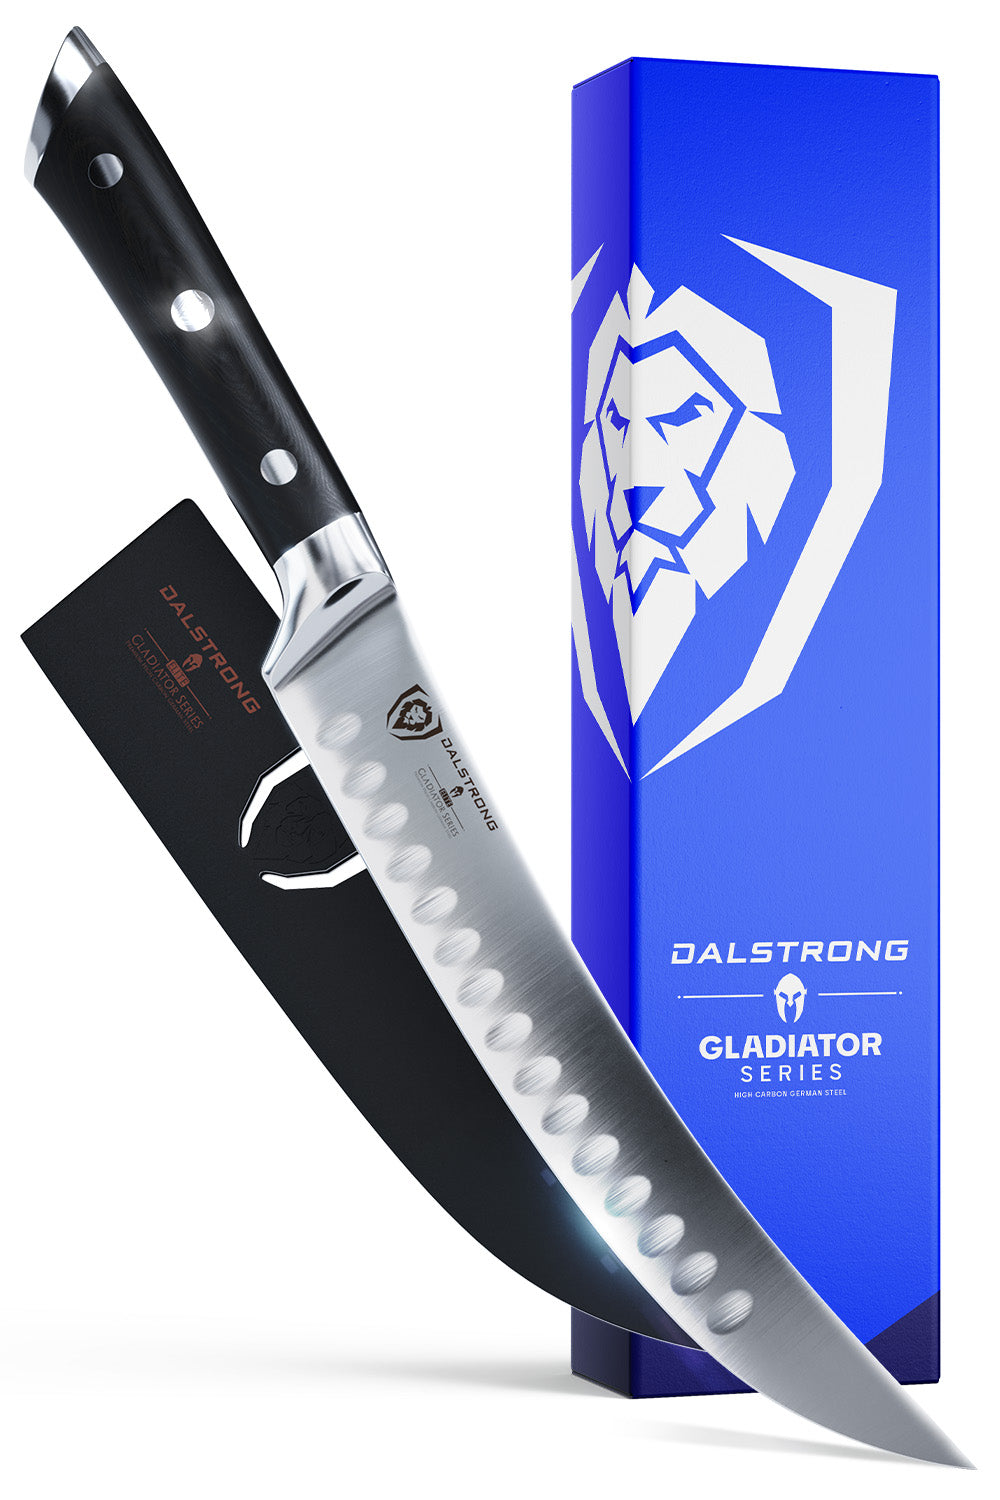 Butcher & Breaking Cimiter Knife 8" | Gladiator Series | NSF Certified | Dalstrong ©